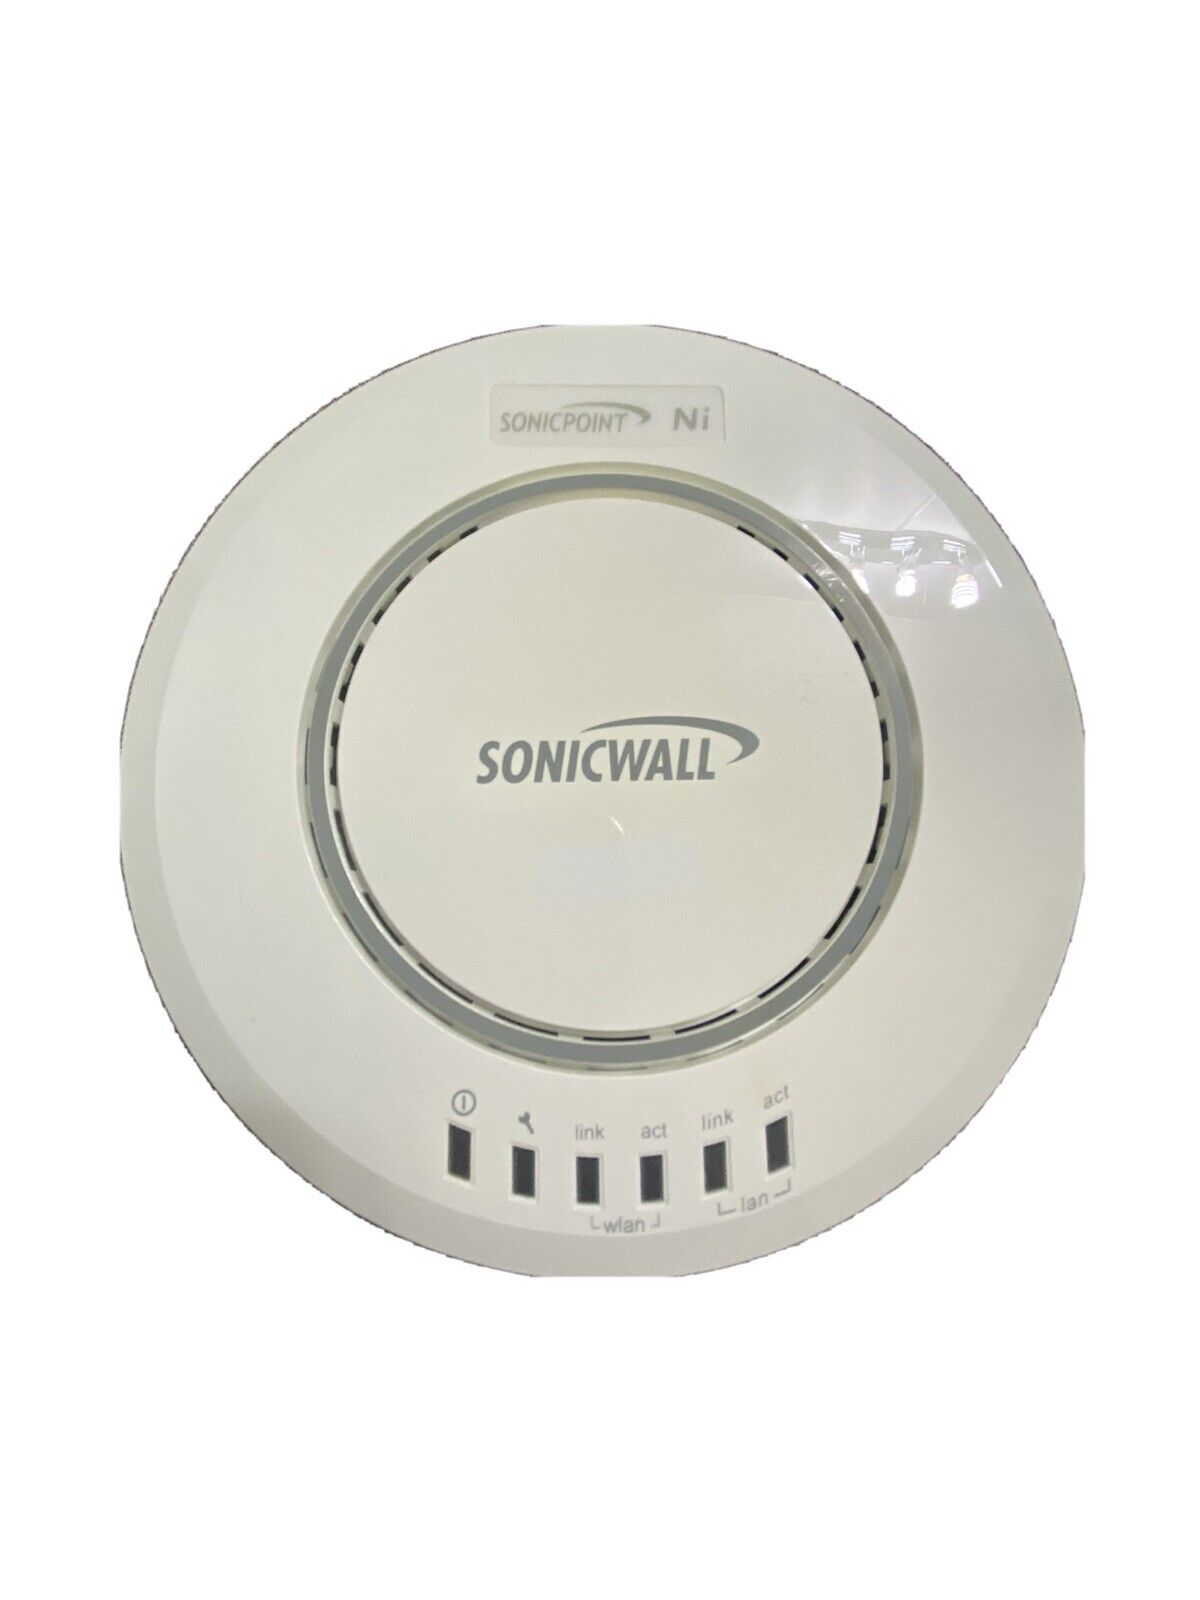 SonicWALL APL21-083 SonicPoint-Ni Wireless Access Point WAP